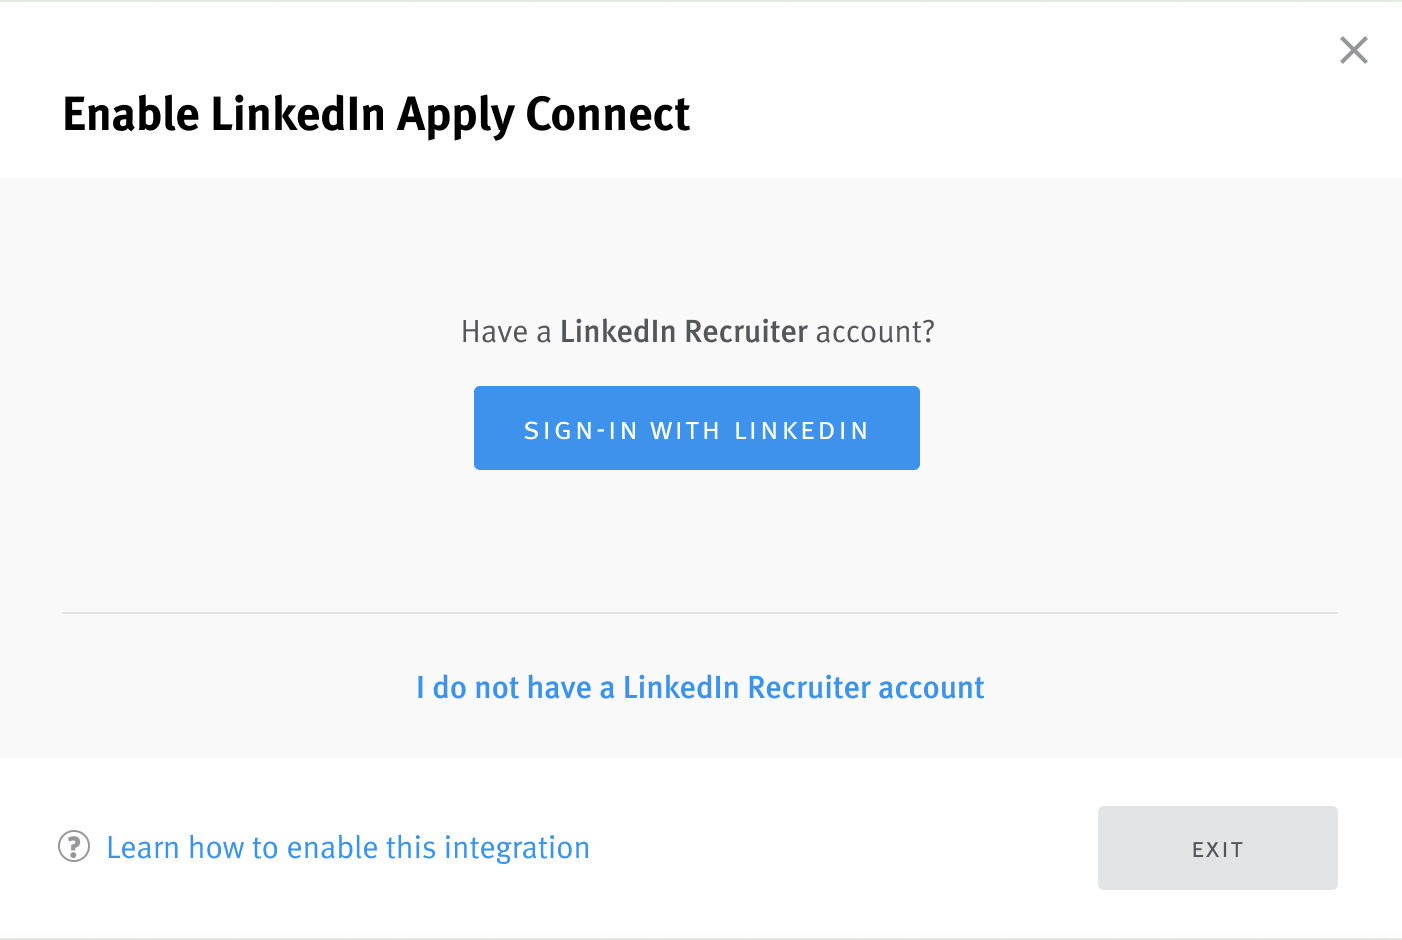 Enable LinkedIn Apply Connect modal with button labelled sign in with LinkedIn